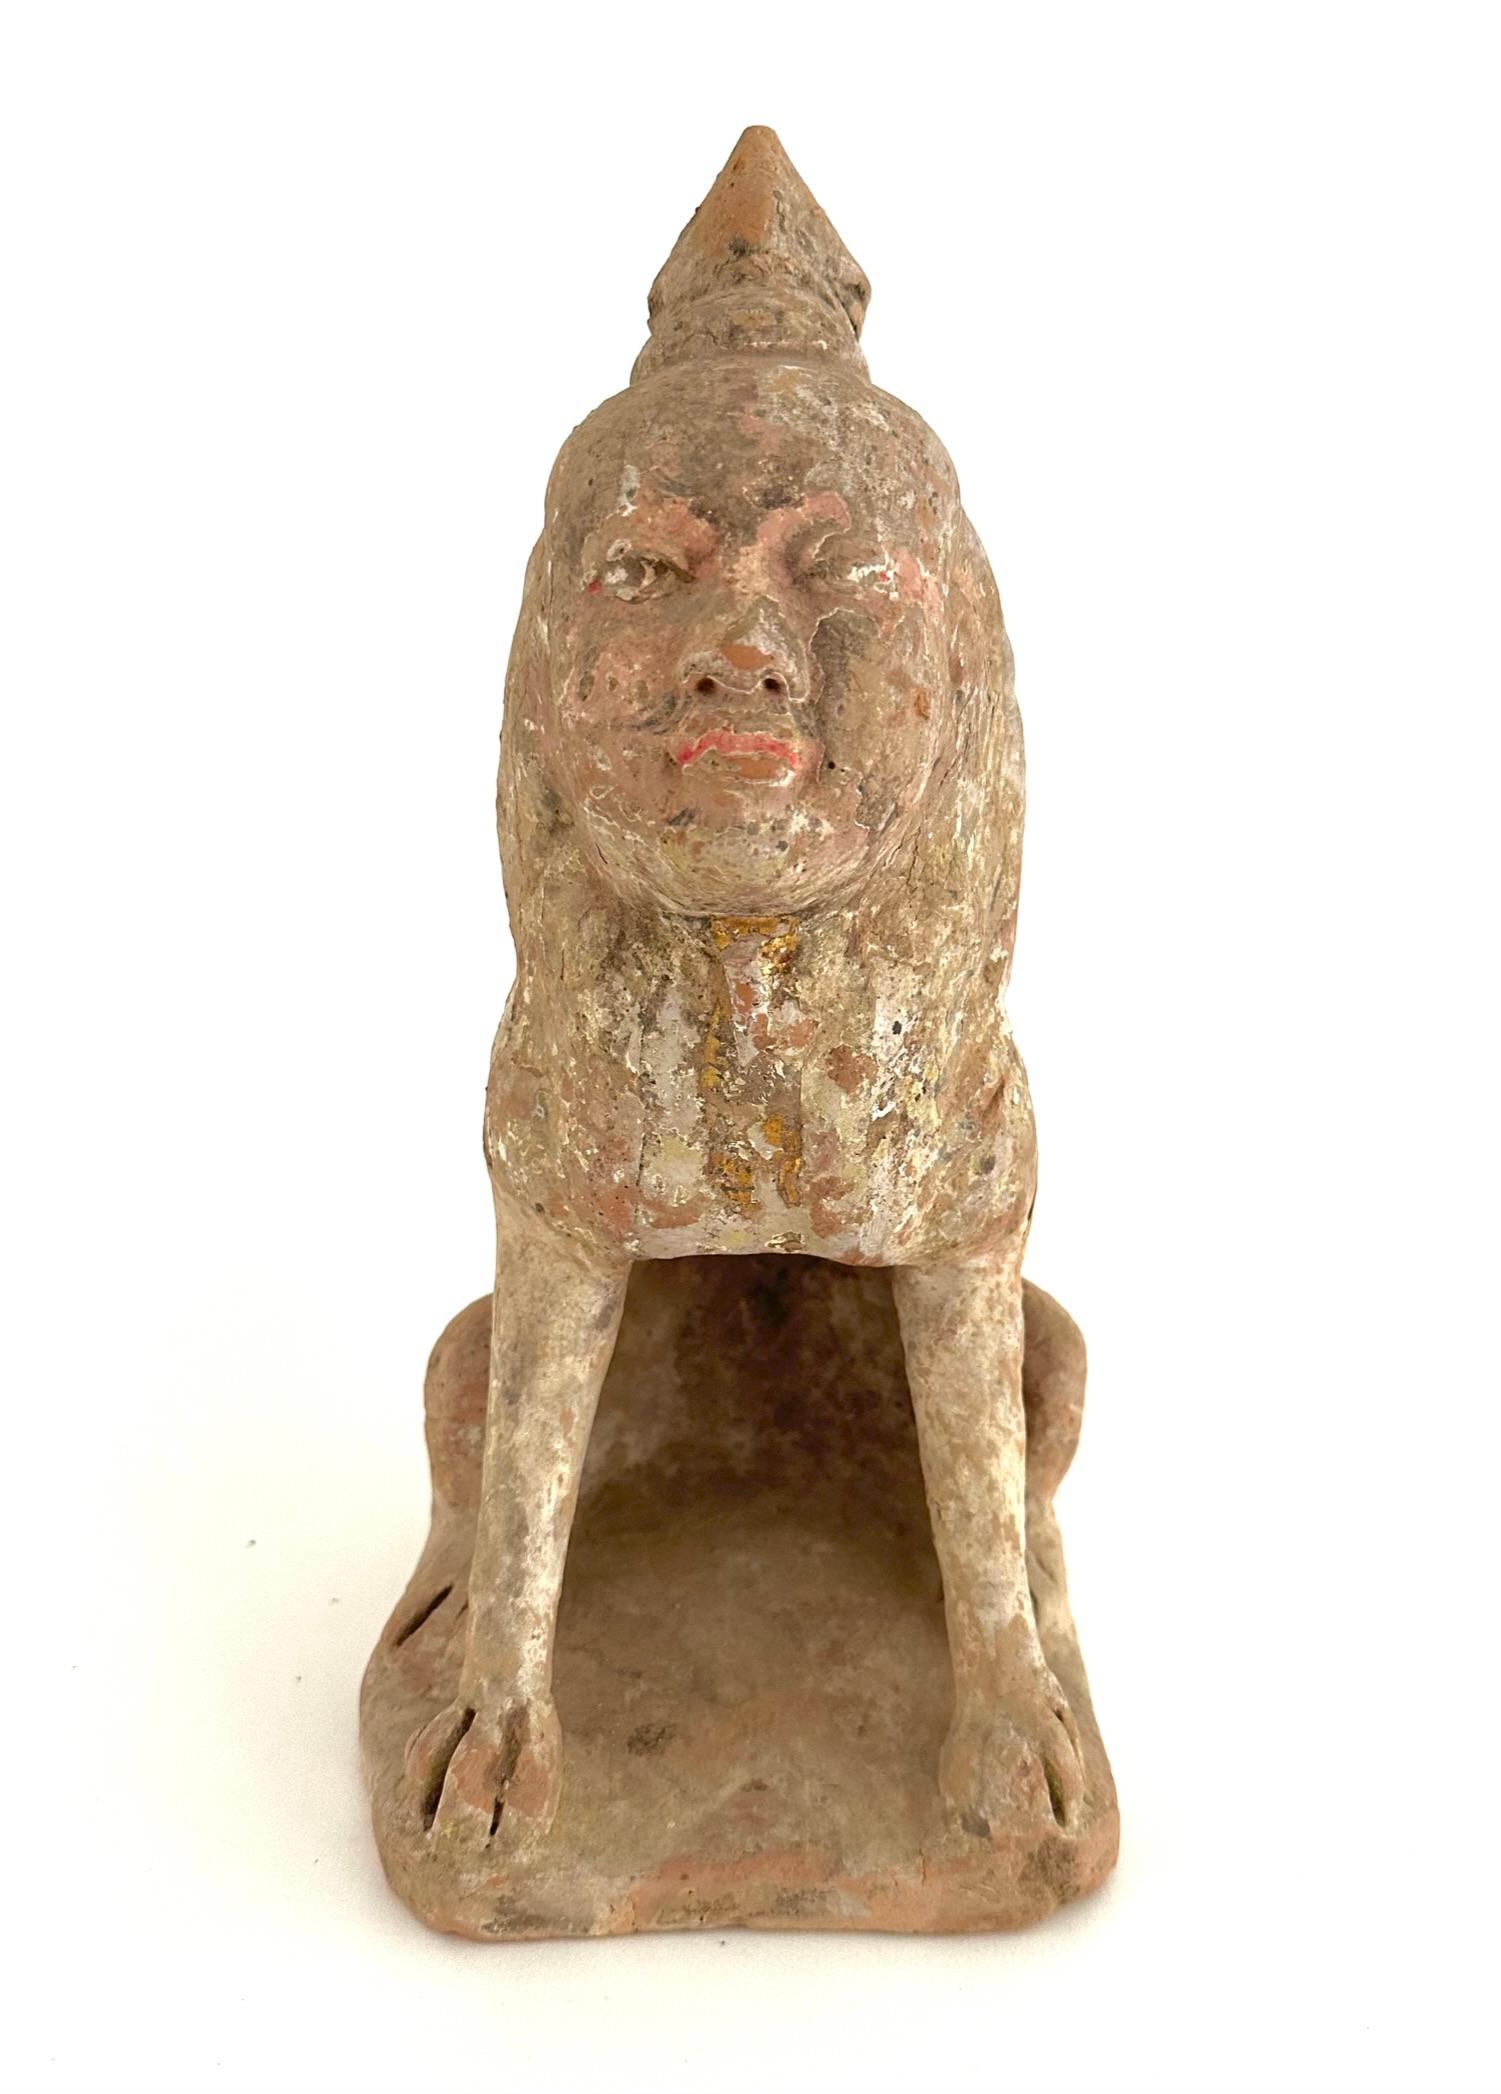 This beautiful Tang dynasty earth spirit with human face and animal body is crafted with terracotta and paint.
This semi-human spirit figure is seated on its haunches with cloven hooves planted firmly on the base. Wearing conical mandarin style